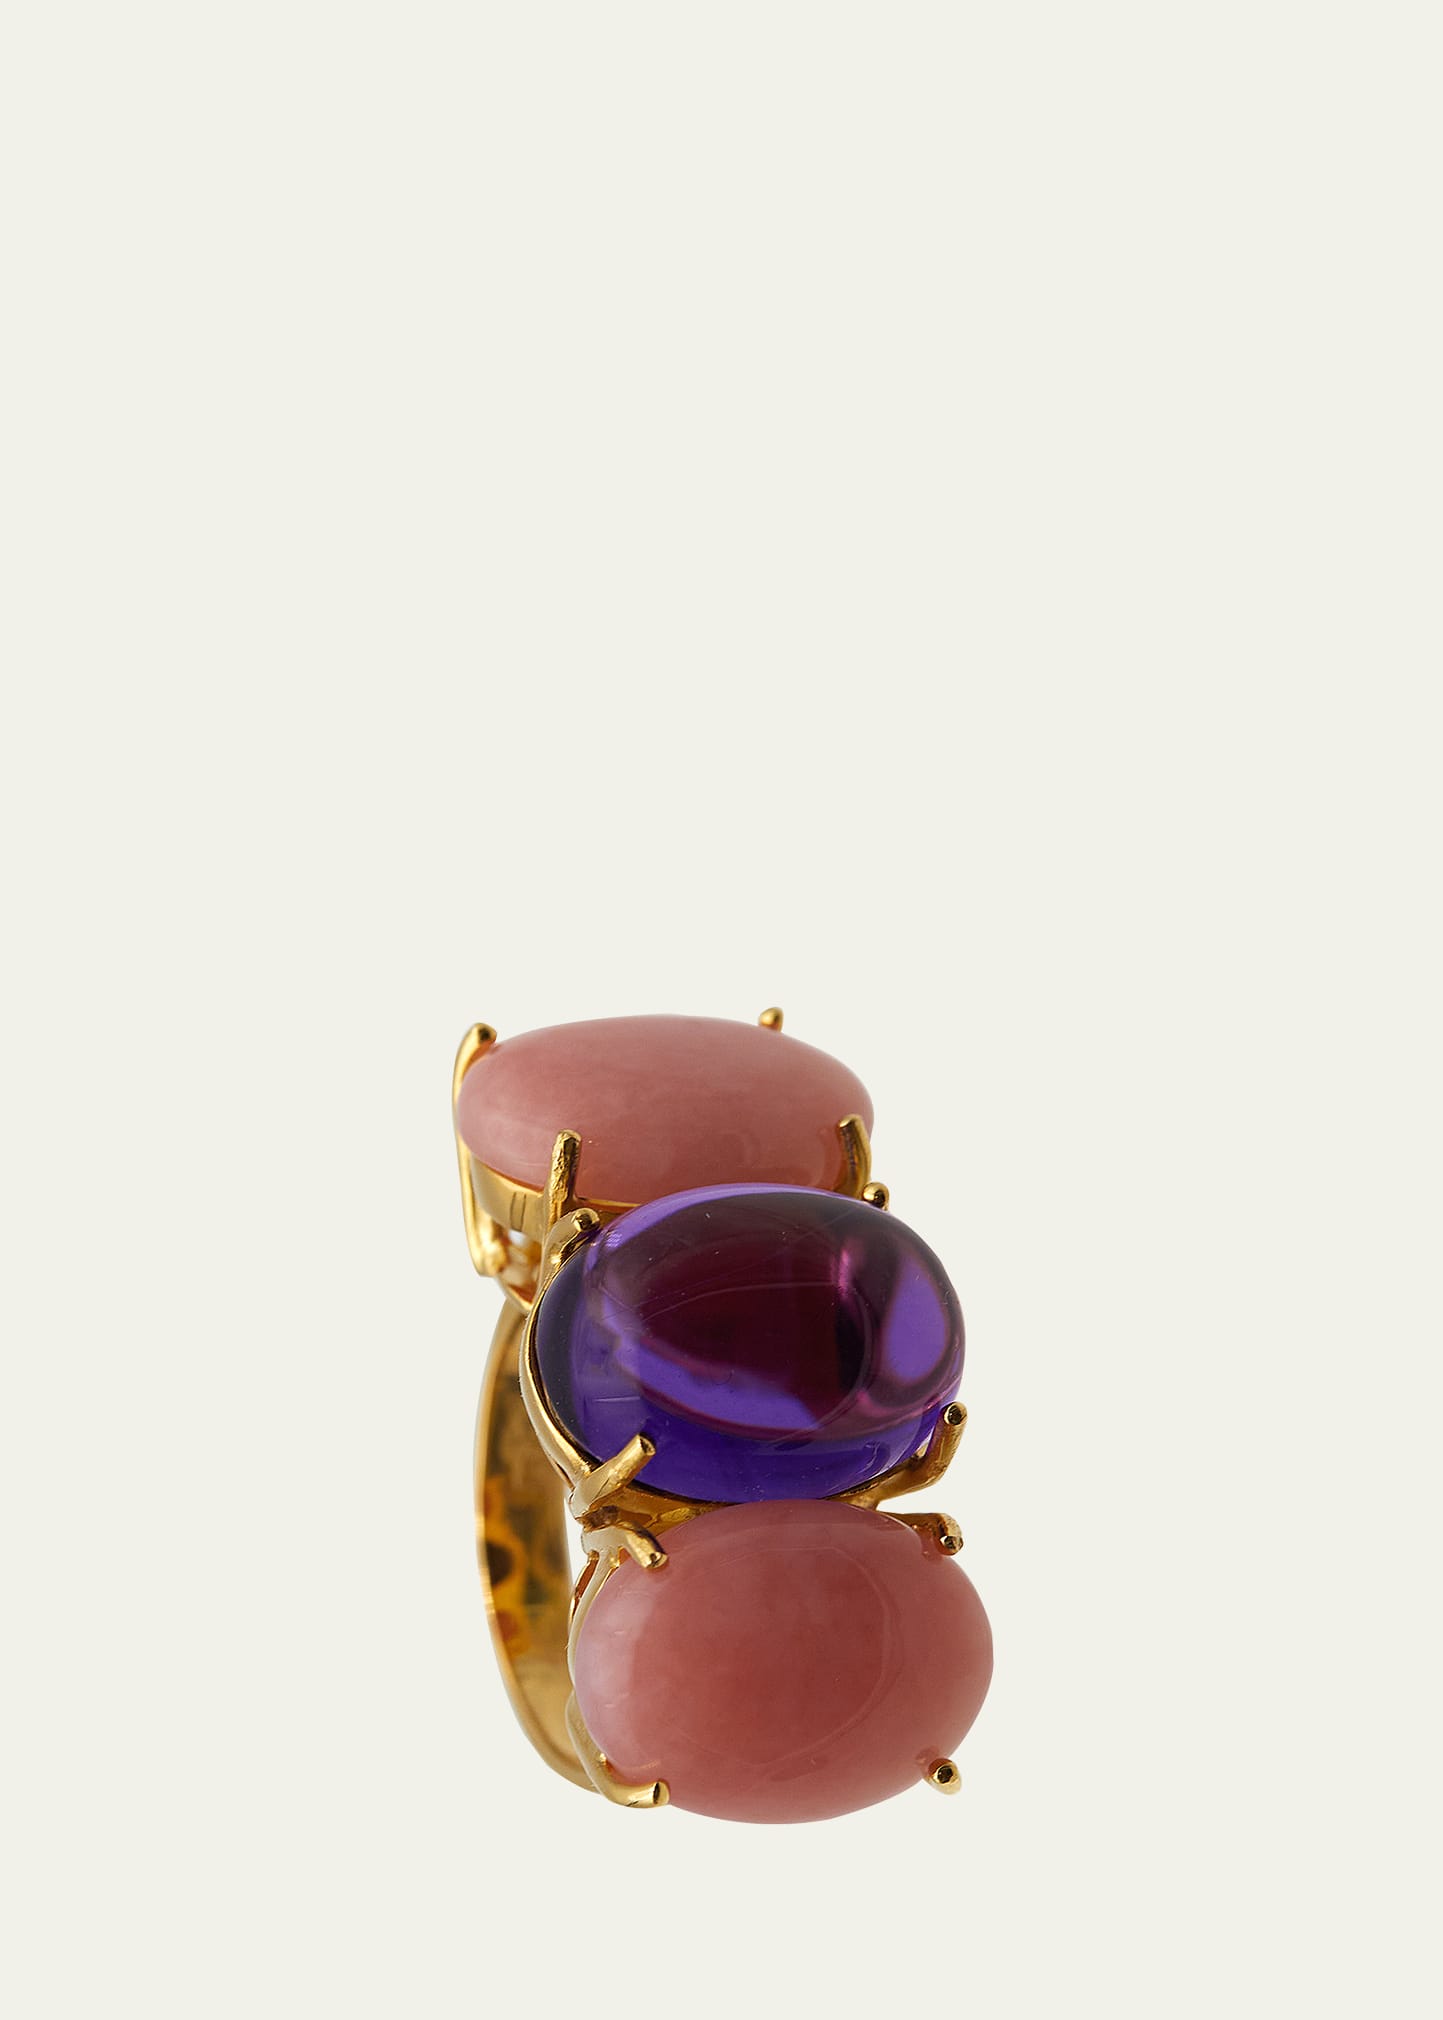 Grazia And Marica Vozza Trilogy Ring with Rhodonite and Amethyst in 18K Yellow Gold